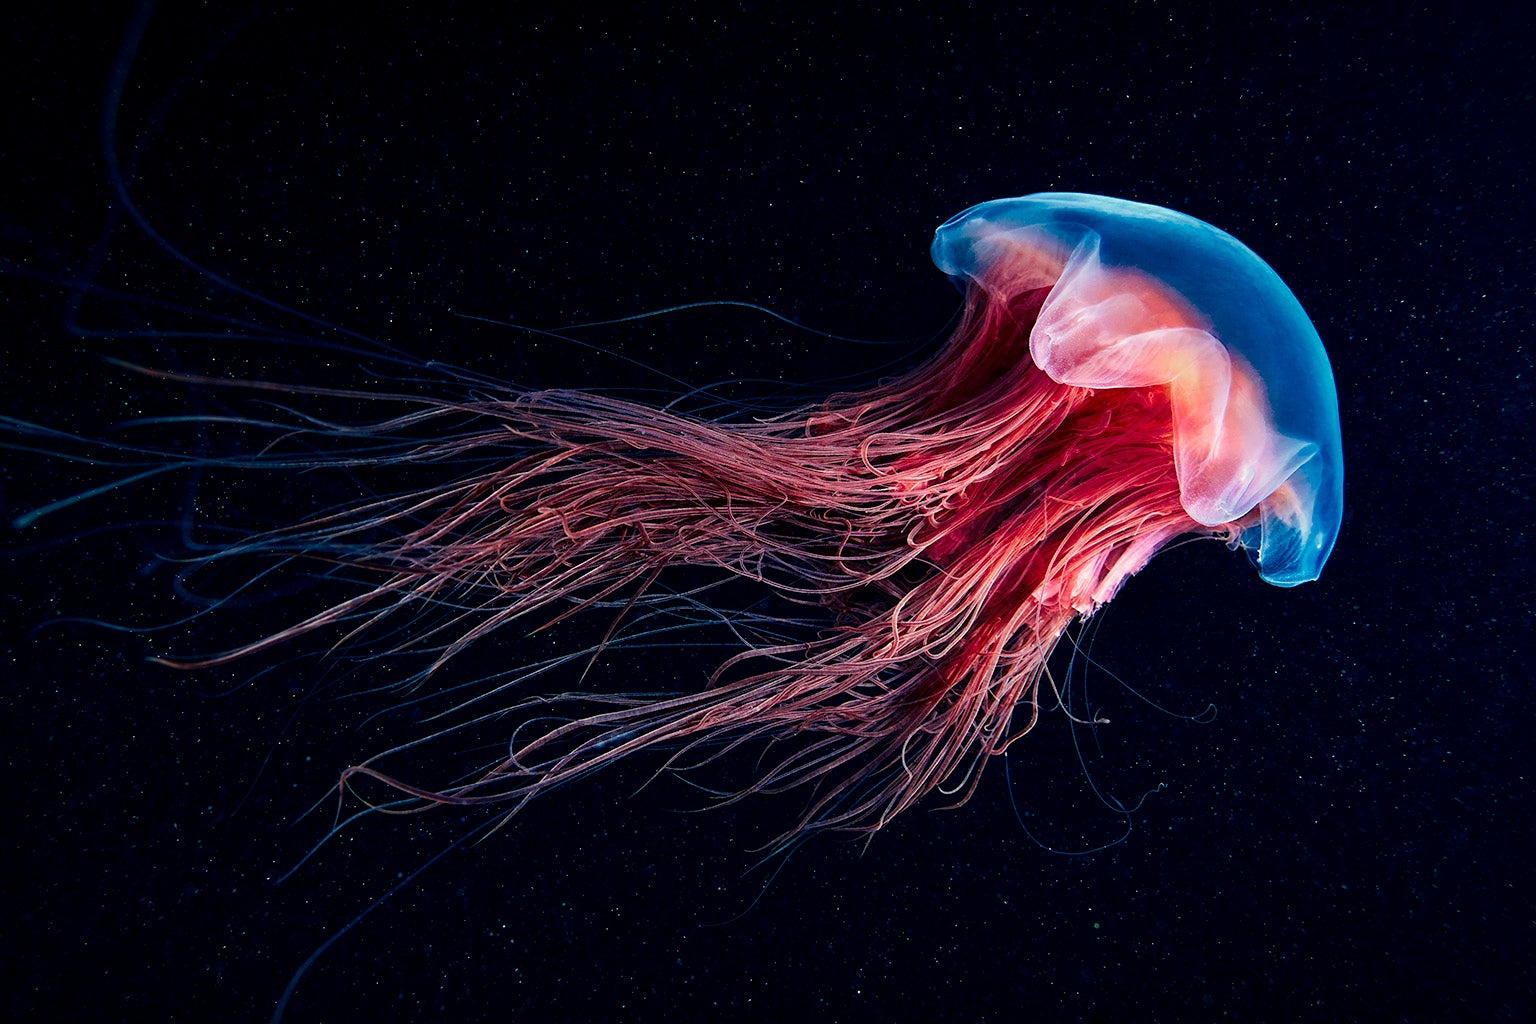 most beautiful sea creatures in the world -  The Luminous Jellyfish